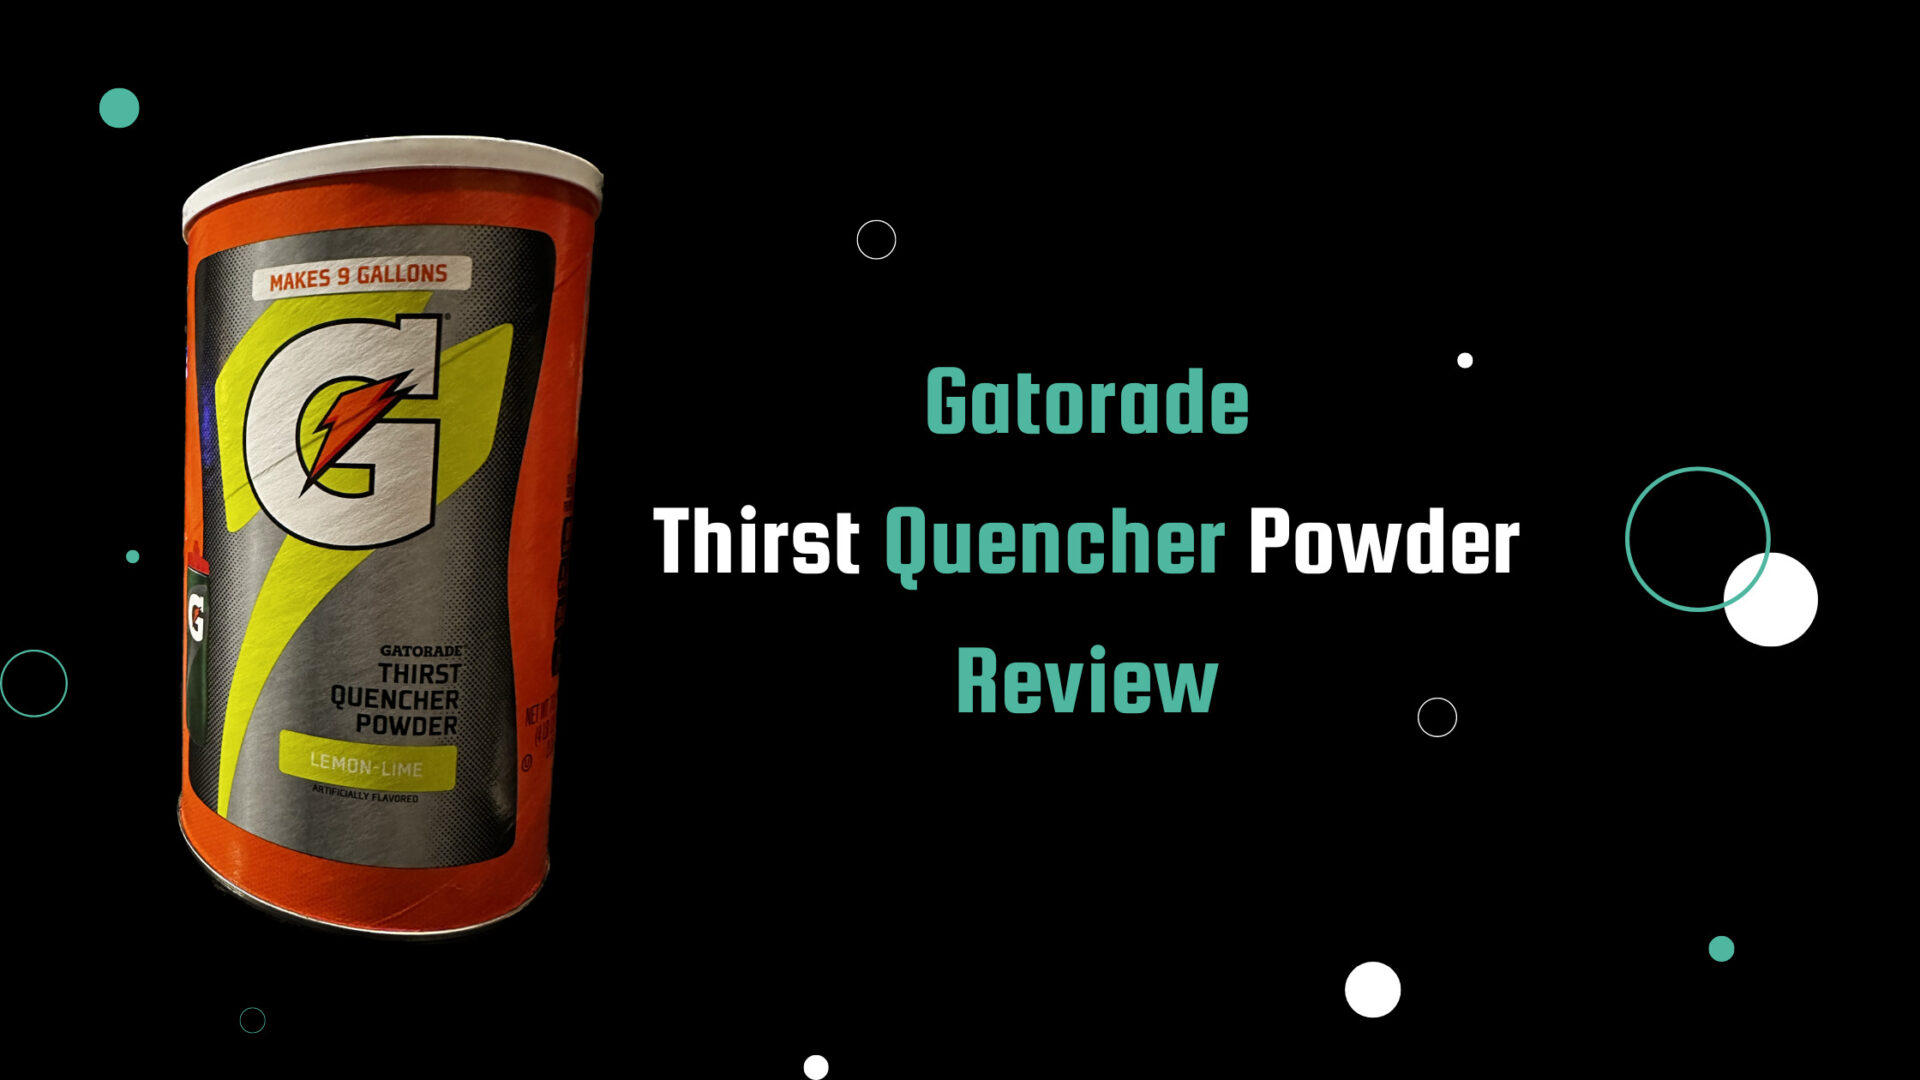 A canister of Gatorade Thirst Quencher Powder against a black background with the review title written in teal and white text.